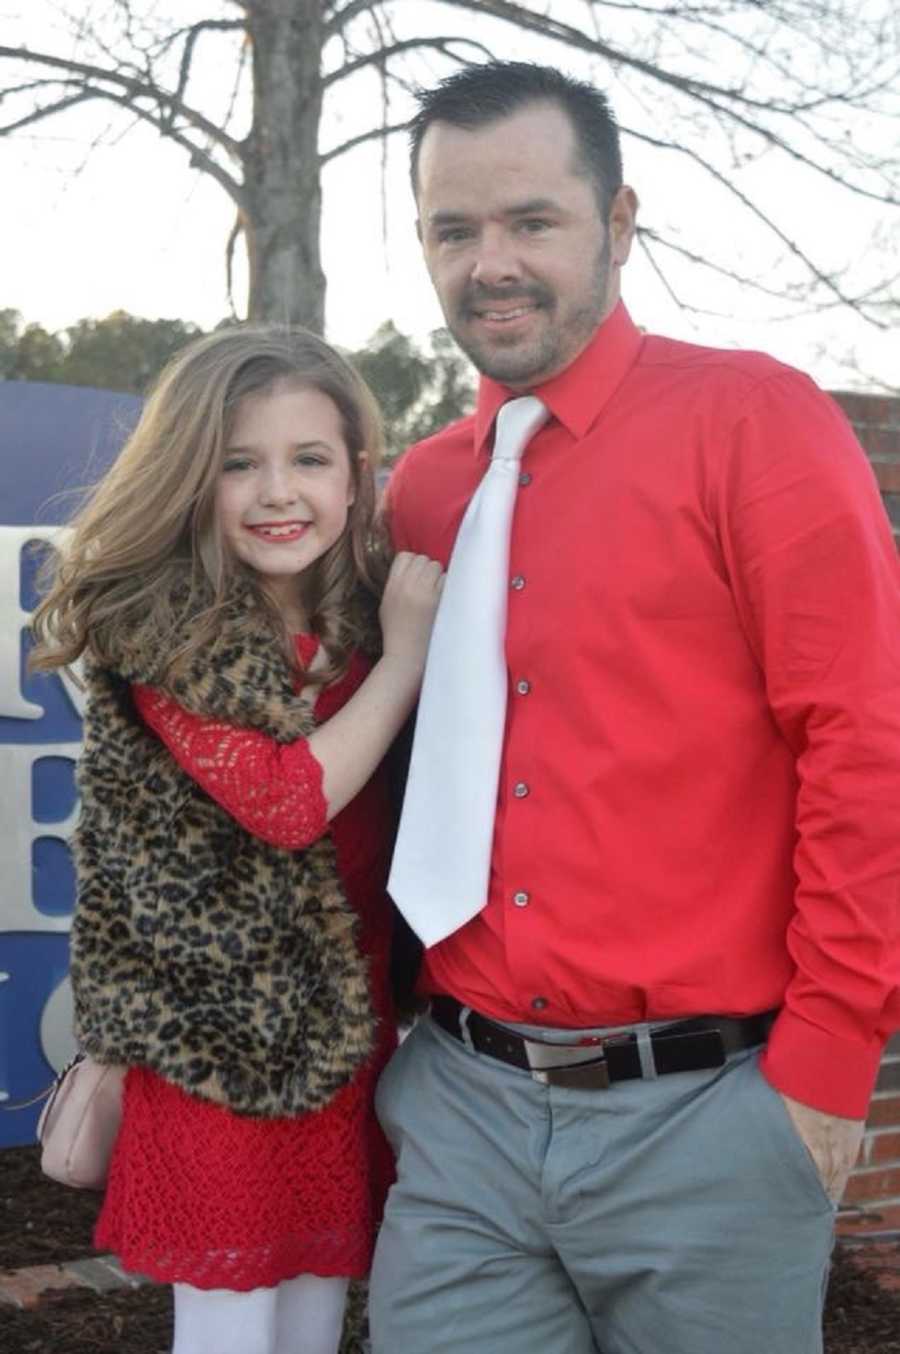 Man who died from heart attack stands smiling outside with daughter for daddy daughter dance